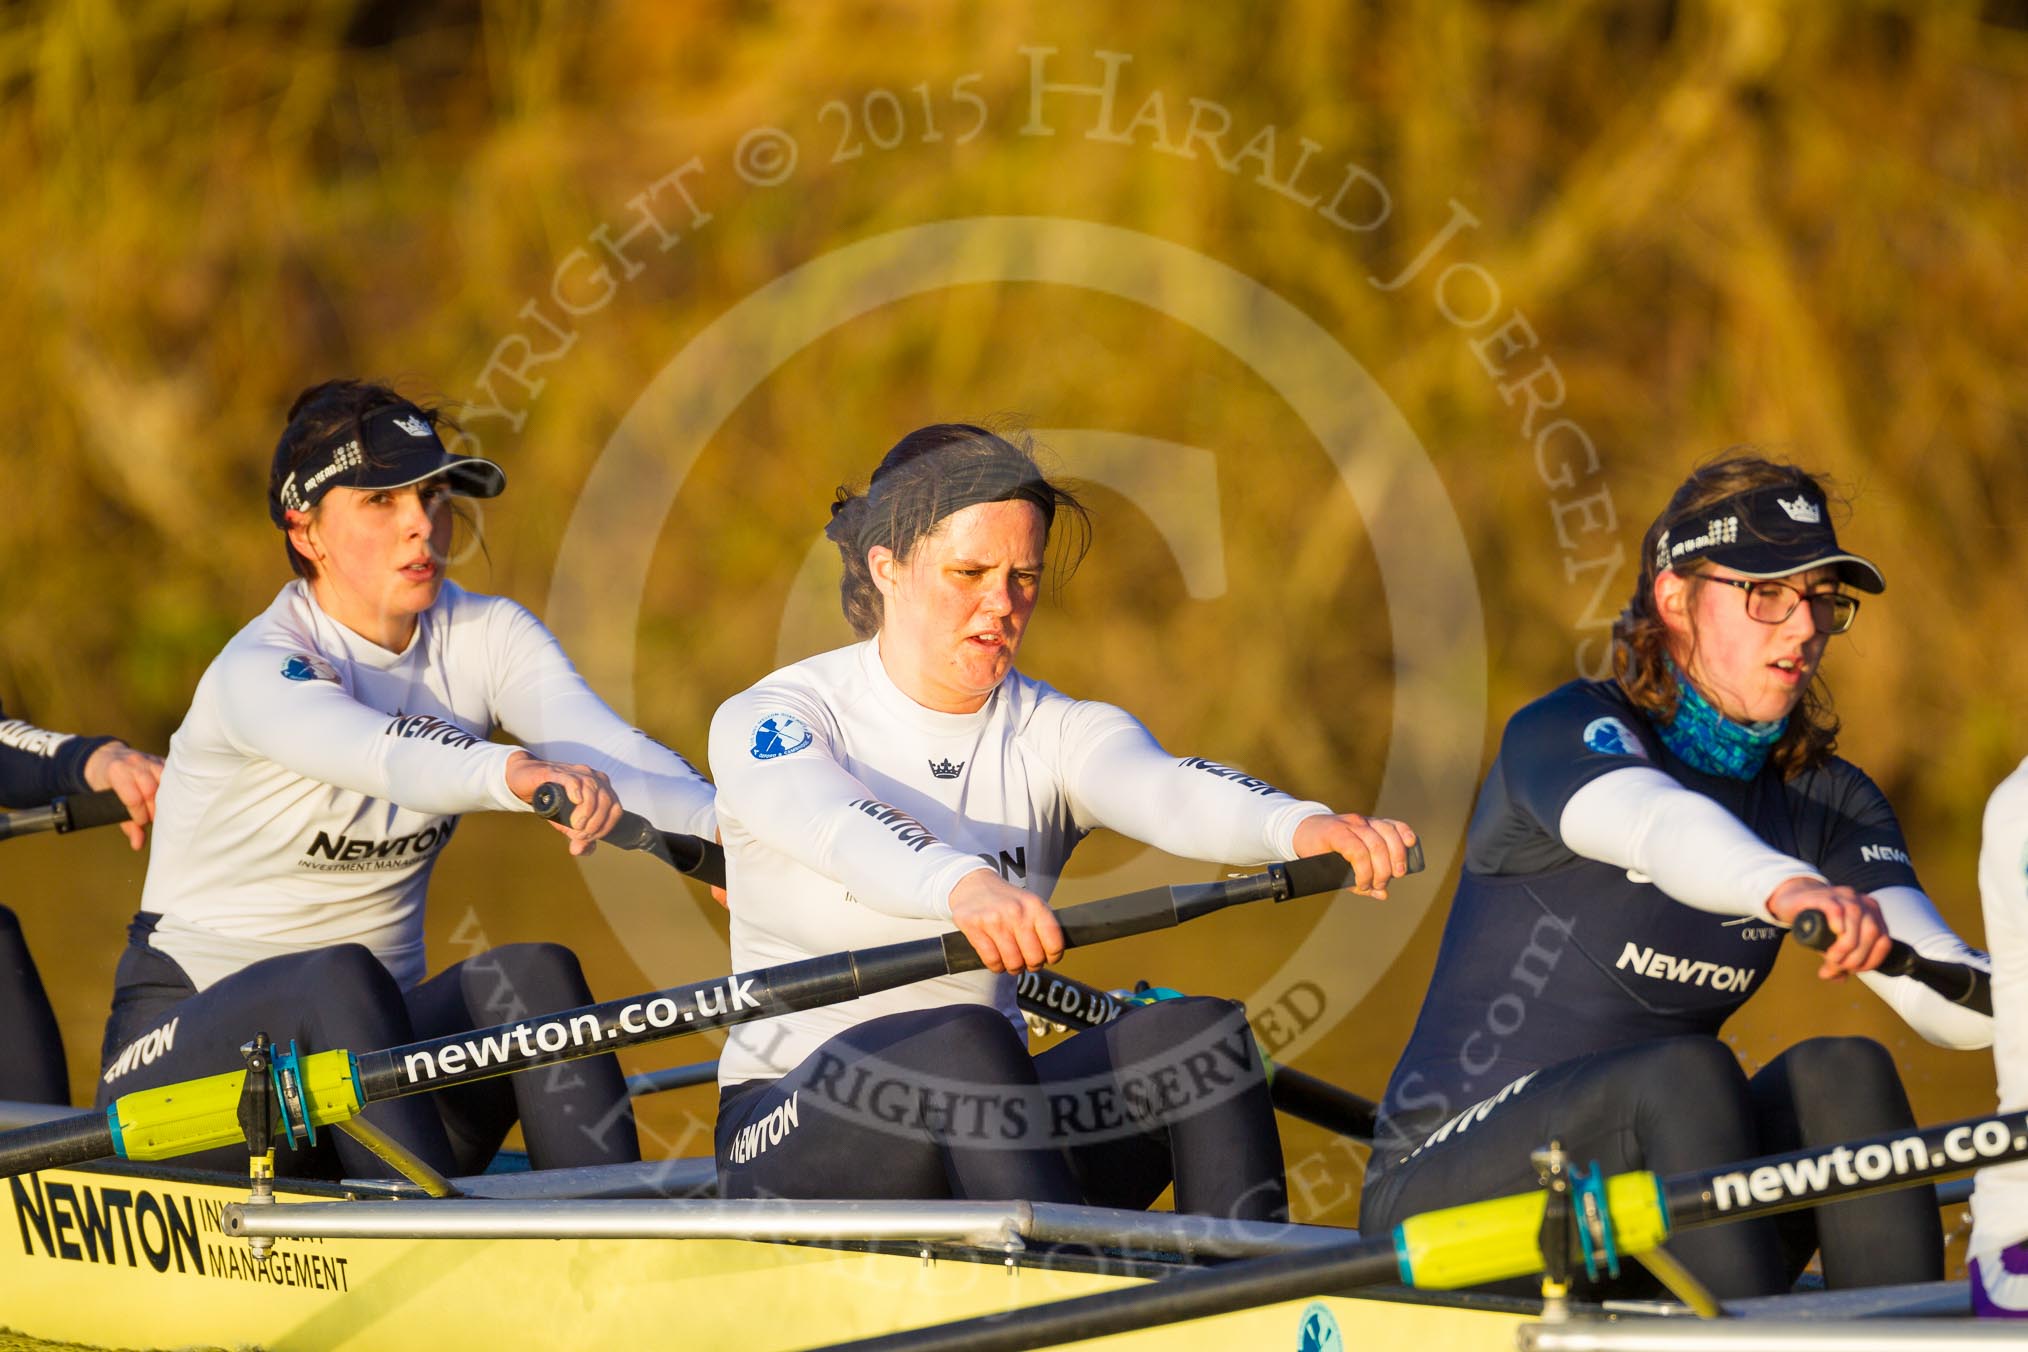 The Boat Race season 2015: OUWBC training Wallingford.

Wallingford,

United Kingdom,
on 04 March 2015 at 17:10, image #261